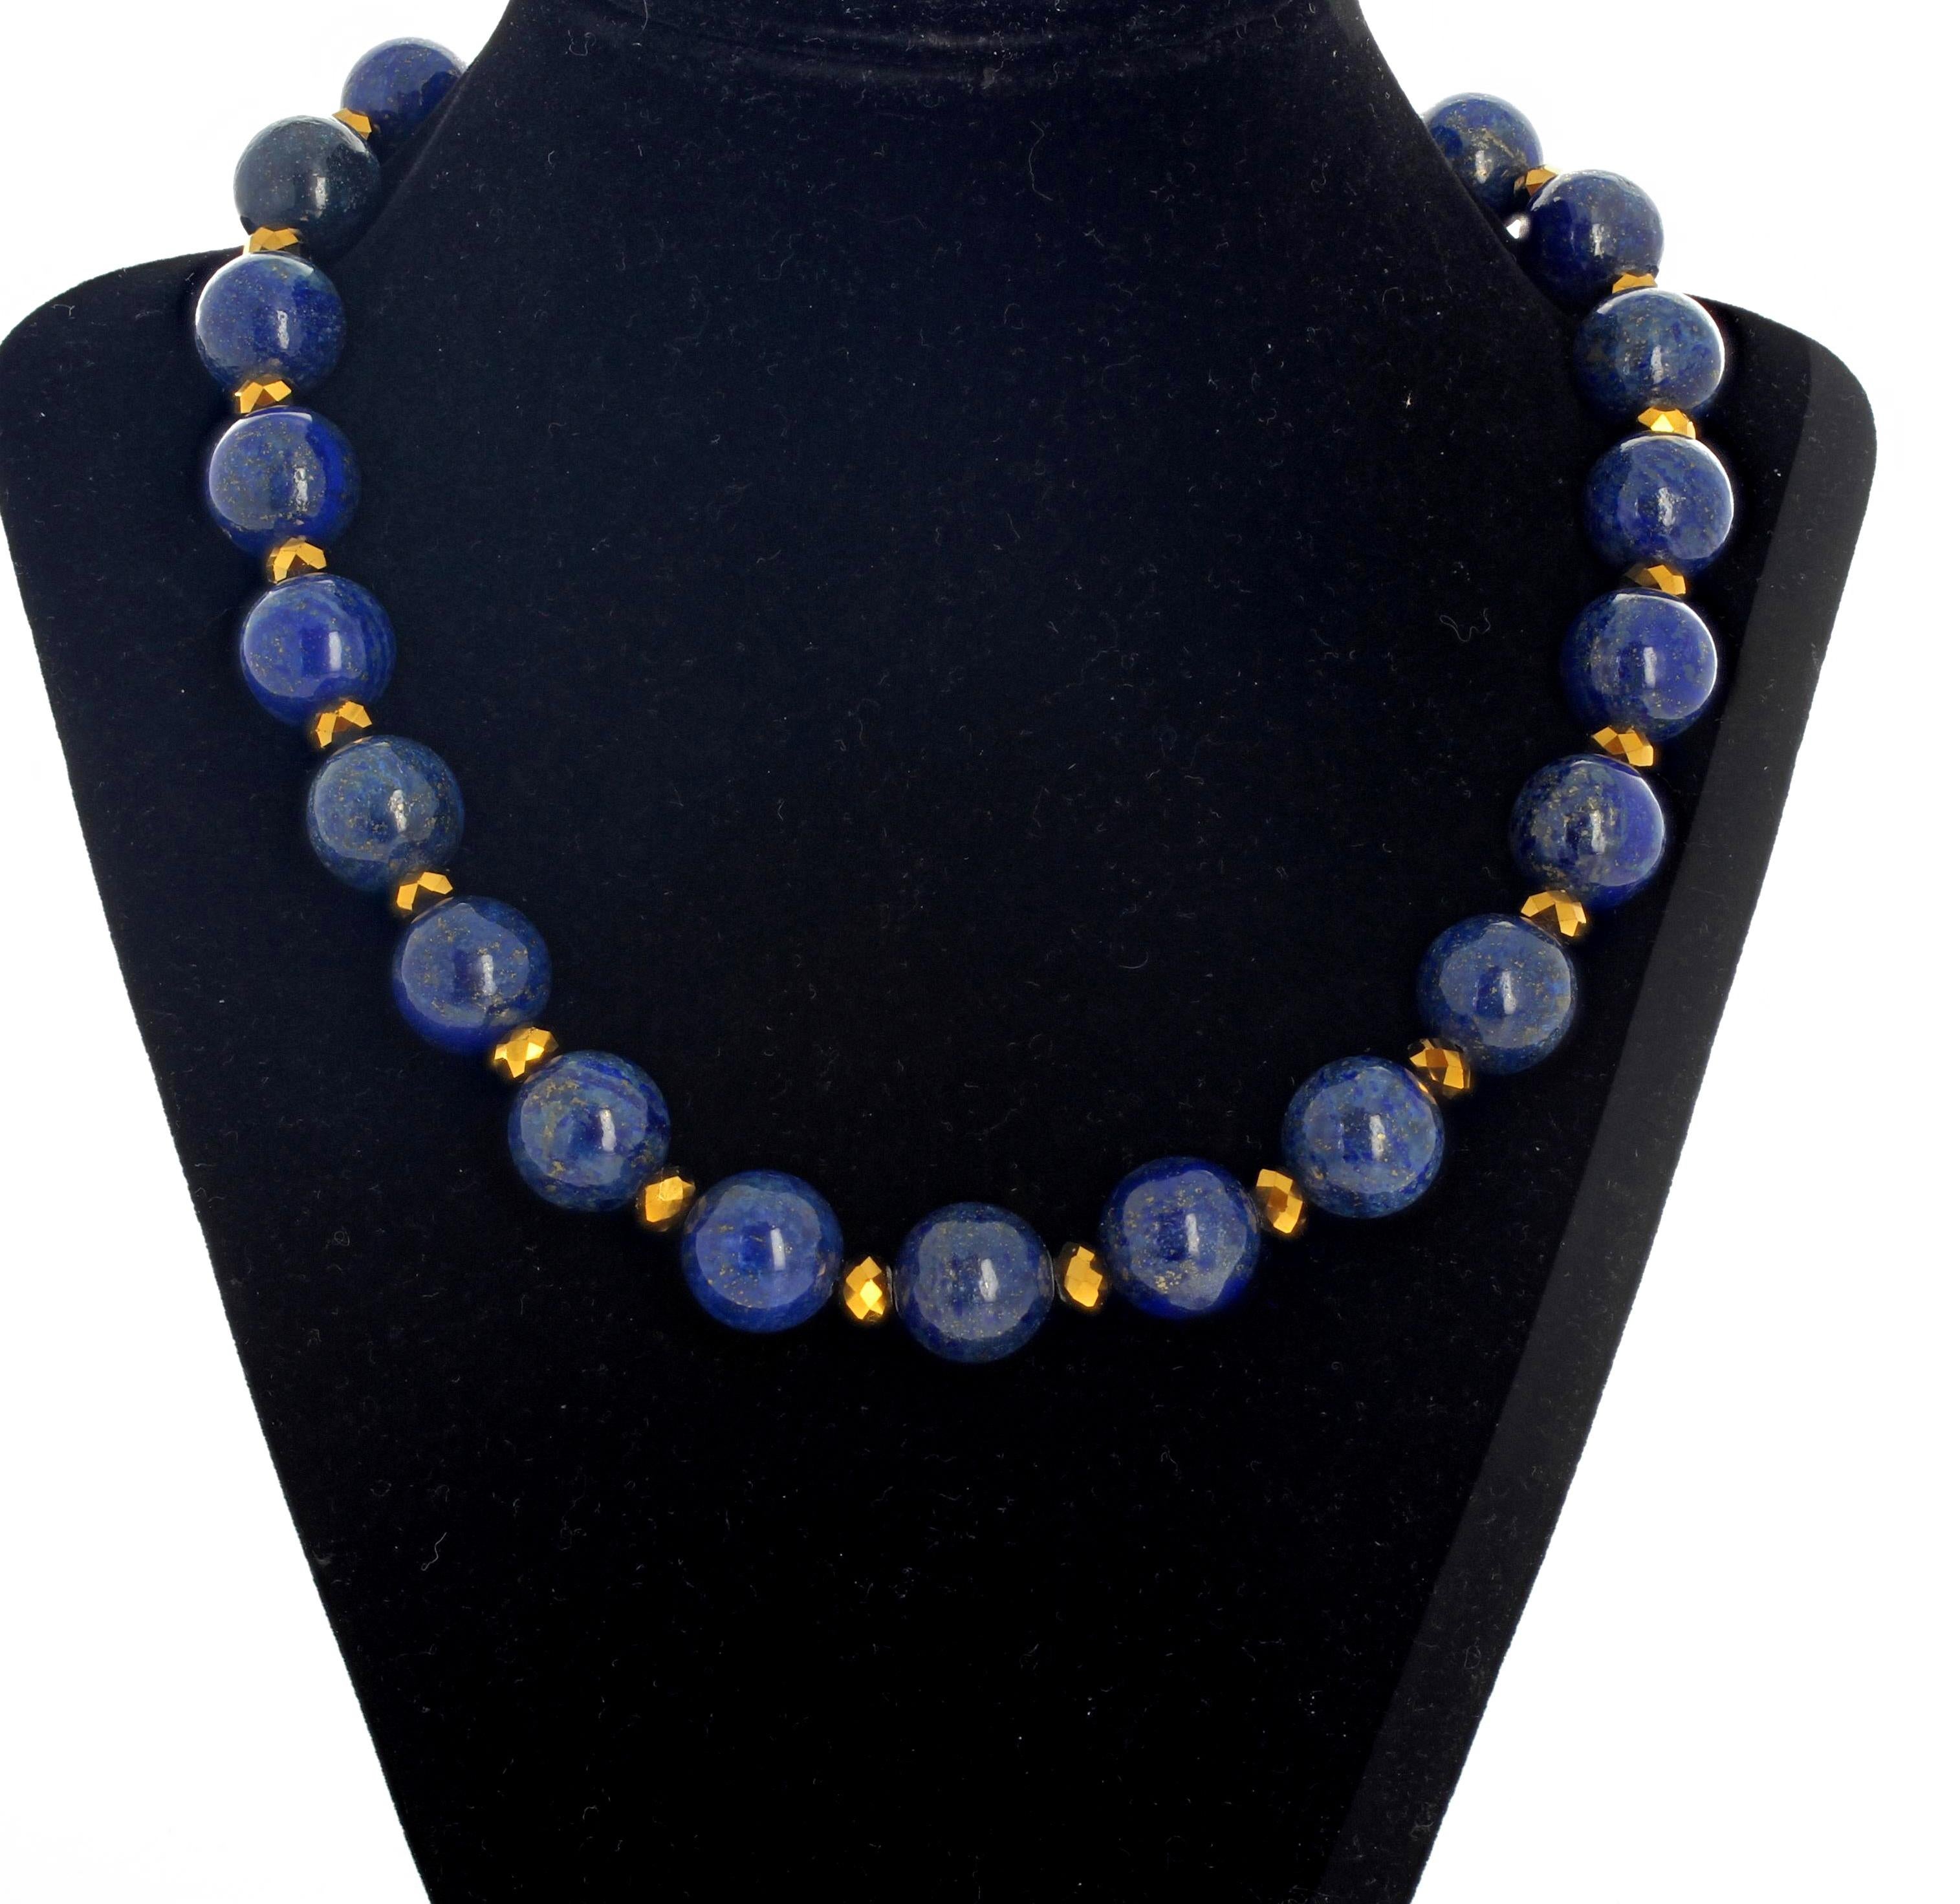 Beautiful highly polished glowing round blue Lapis Lazuli necklace with goldy tone enhancers to push the goldy streaks in the Lapis.  This handmade necklace is 17.5 inches long and they measure approximately 10.5 mm.  More from this seller by